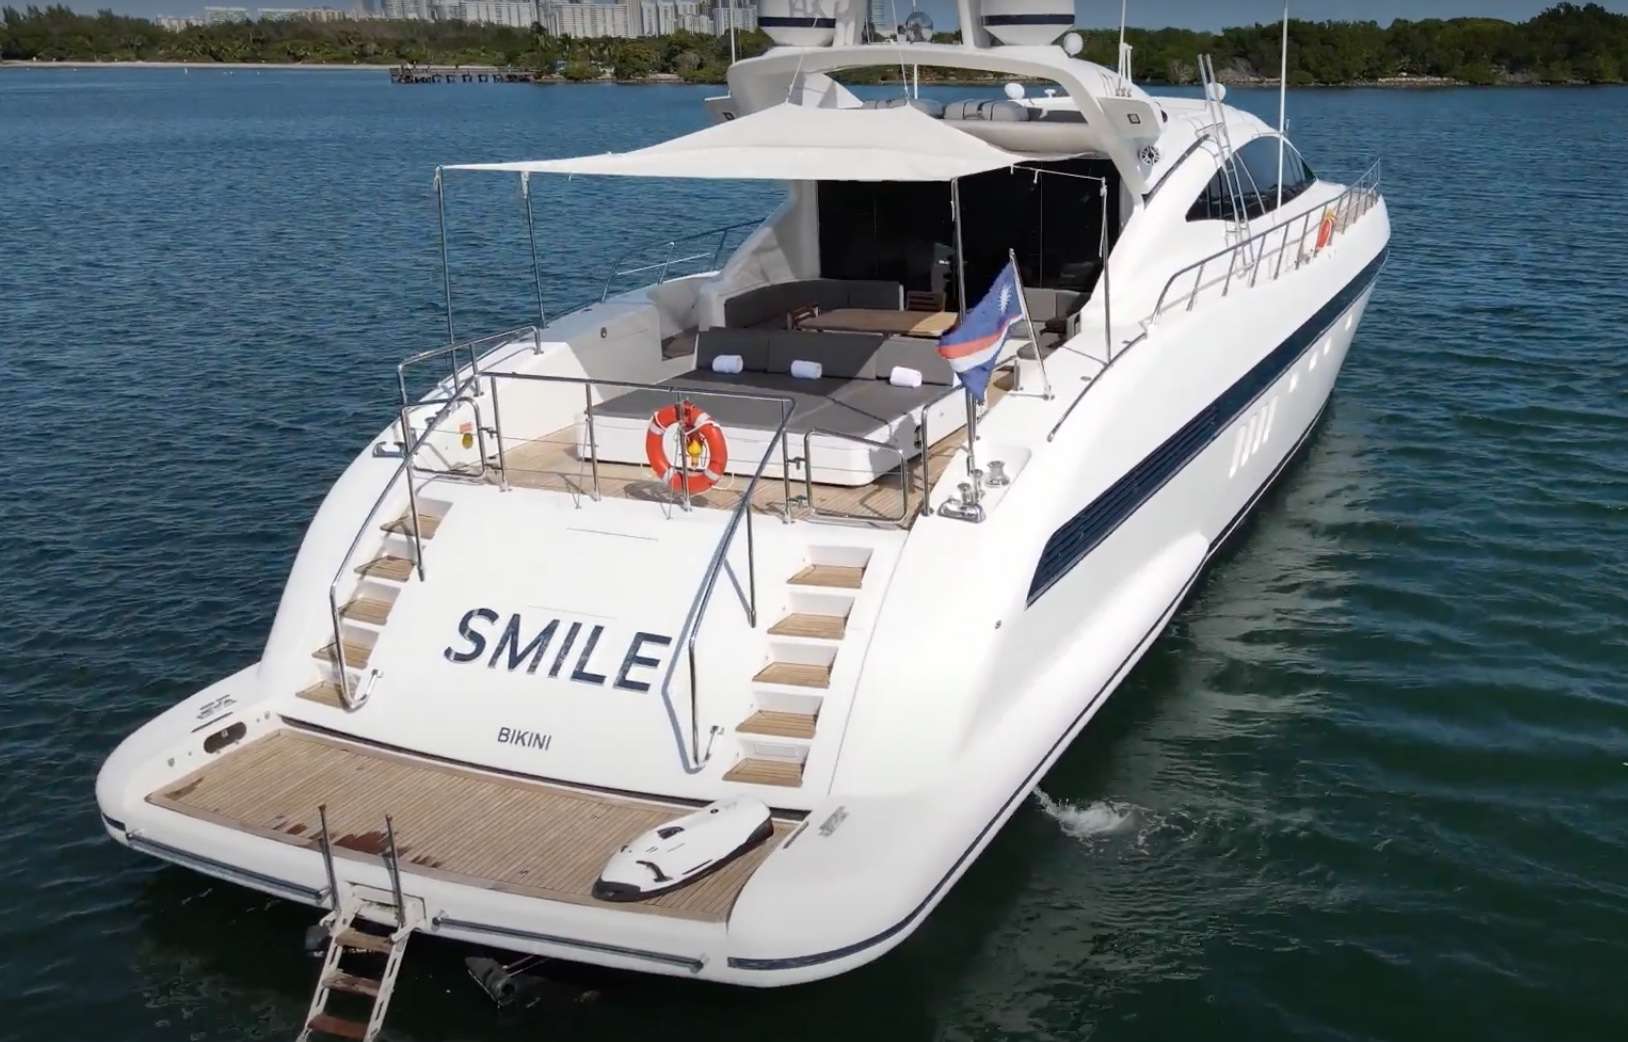 SMILE - Yacht Charter USA & Boat hire in Florida & Bahamas 3